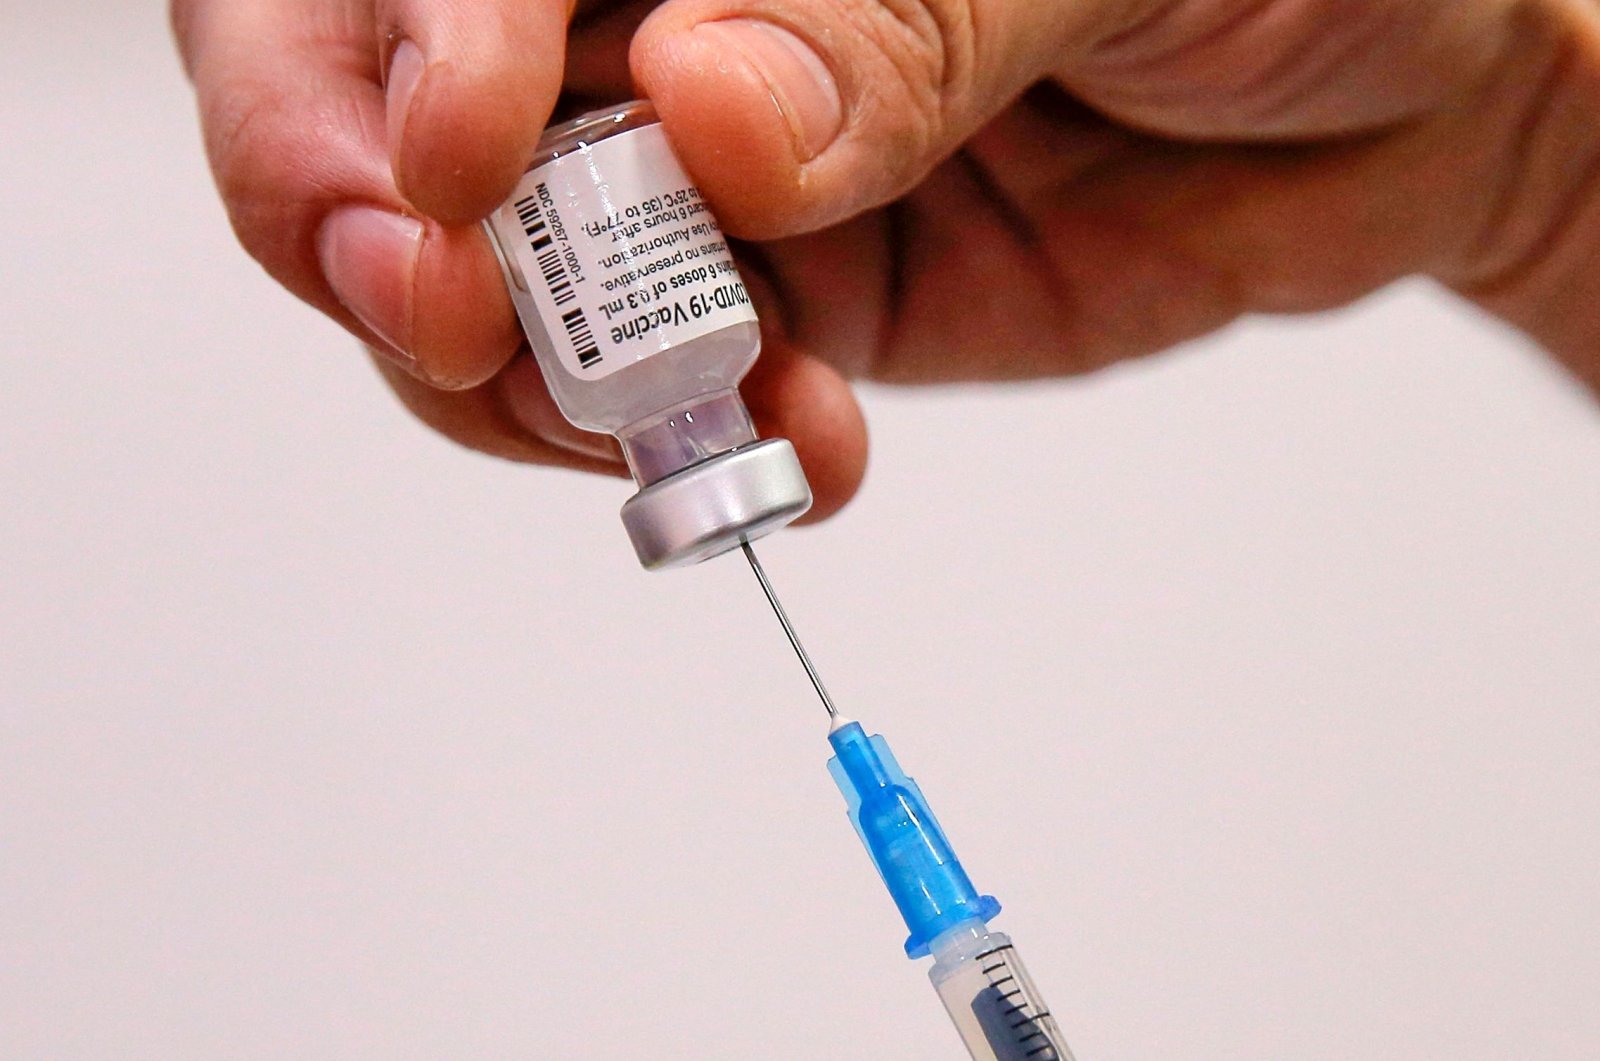 A health workers fills a syringe with a dose of the Pfizer-BioNTech COVID-19 vaccine at a vaccination center, in Santiago, Chile, July 12, 2021. (AFP Photo)